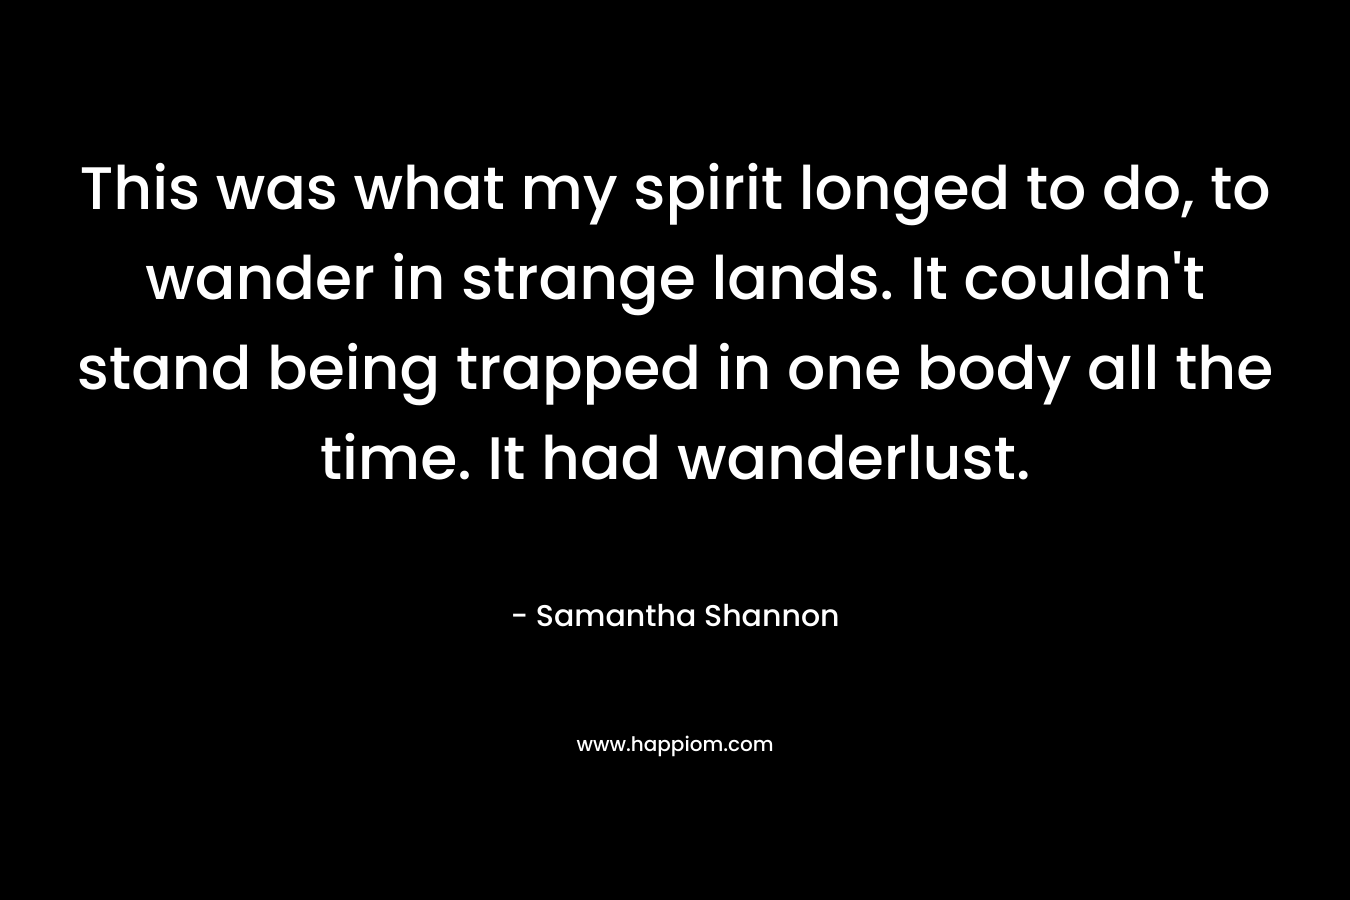 This was what my spirit longed to do, to wander in strange lands. It couldn’t stand being trapped in one body all the time. It had wanderlust. – Samantha Shannon